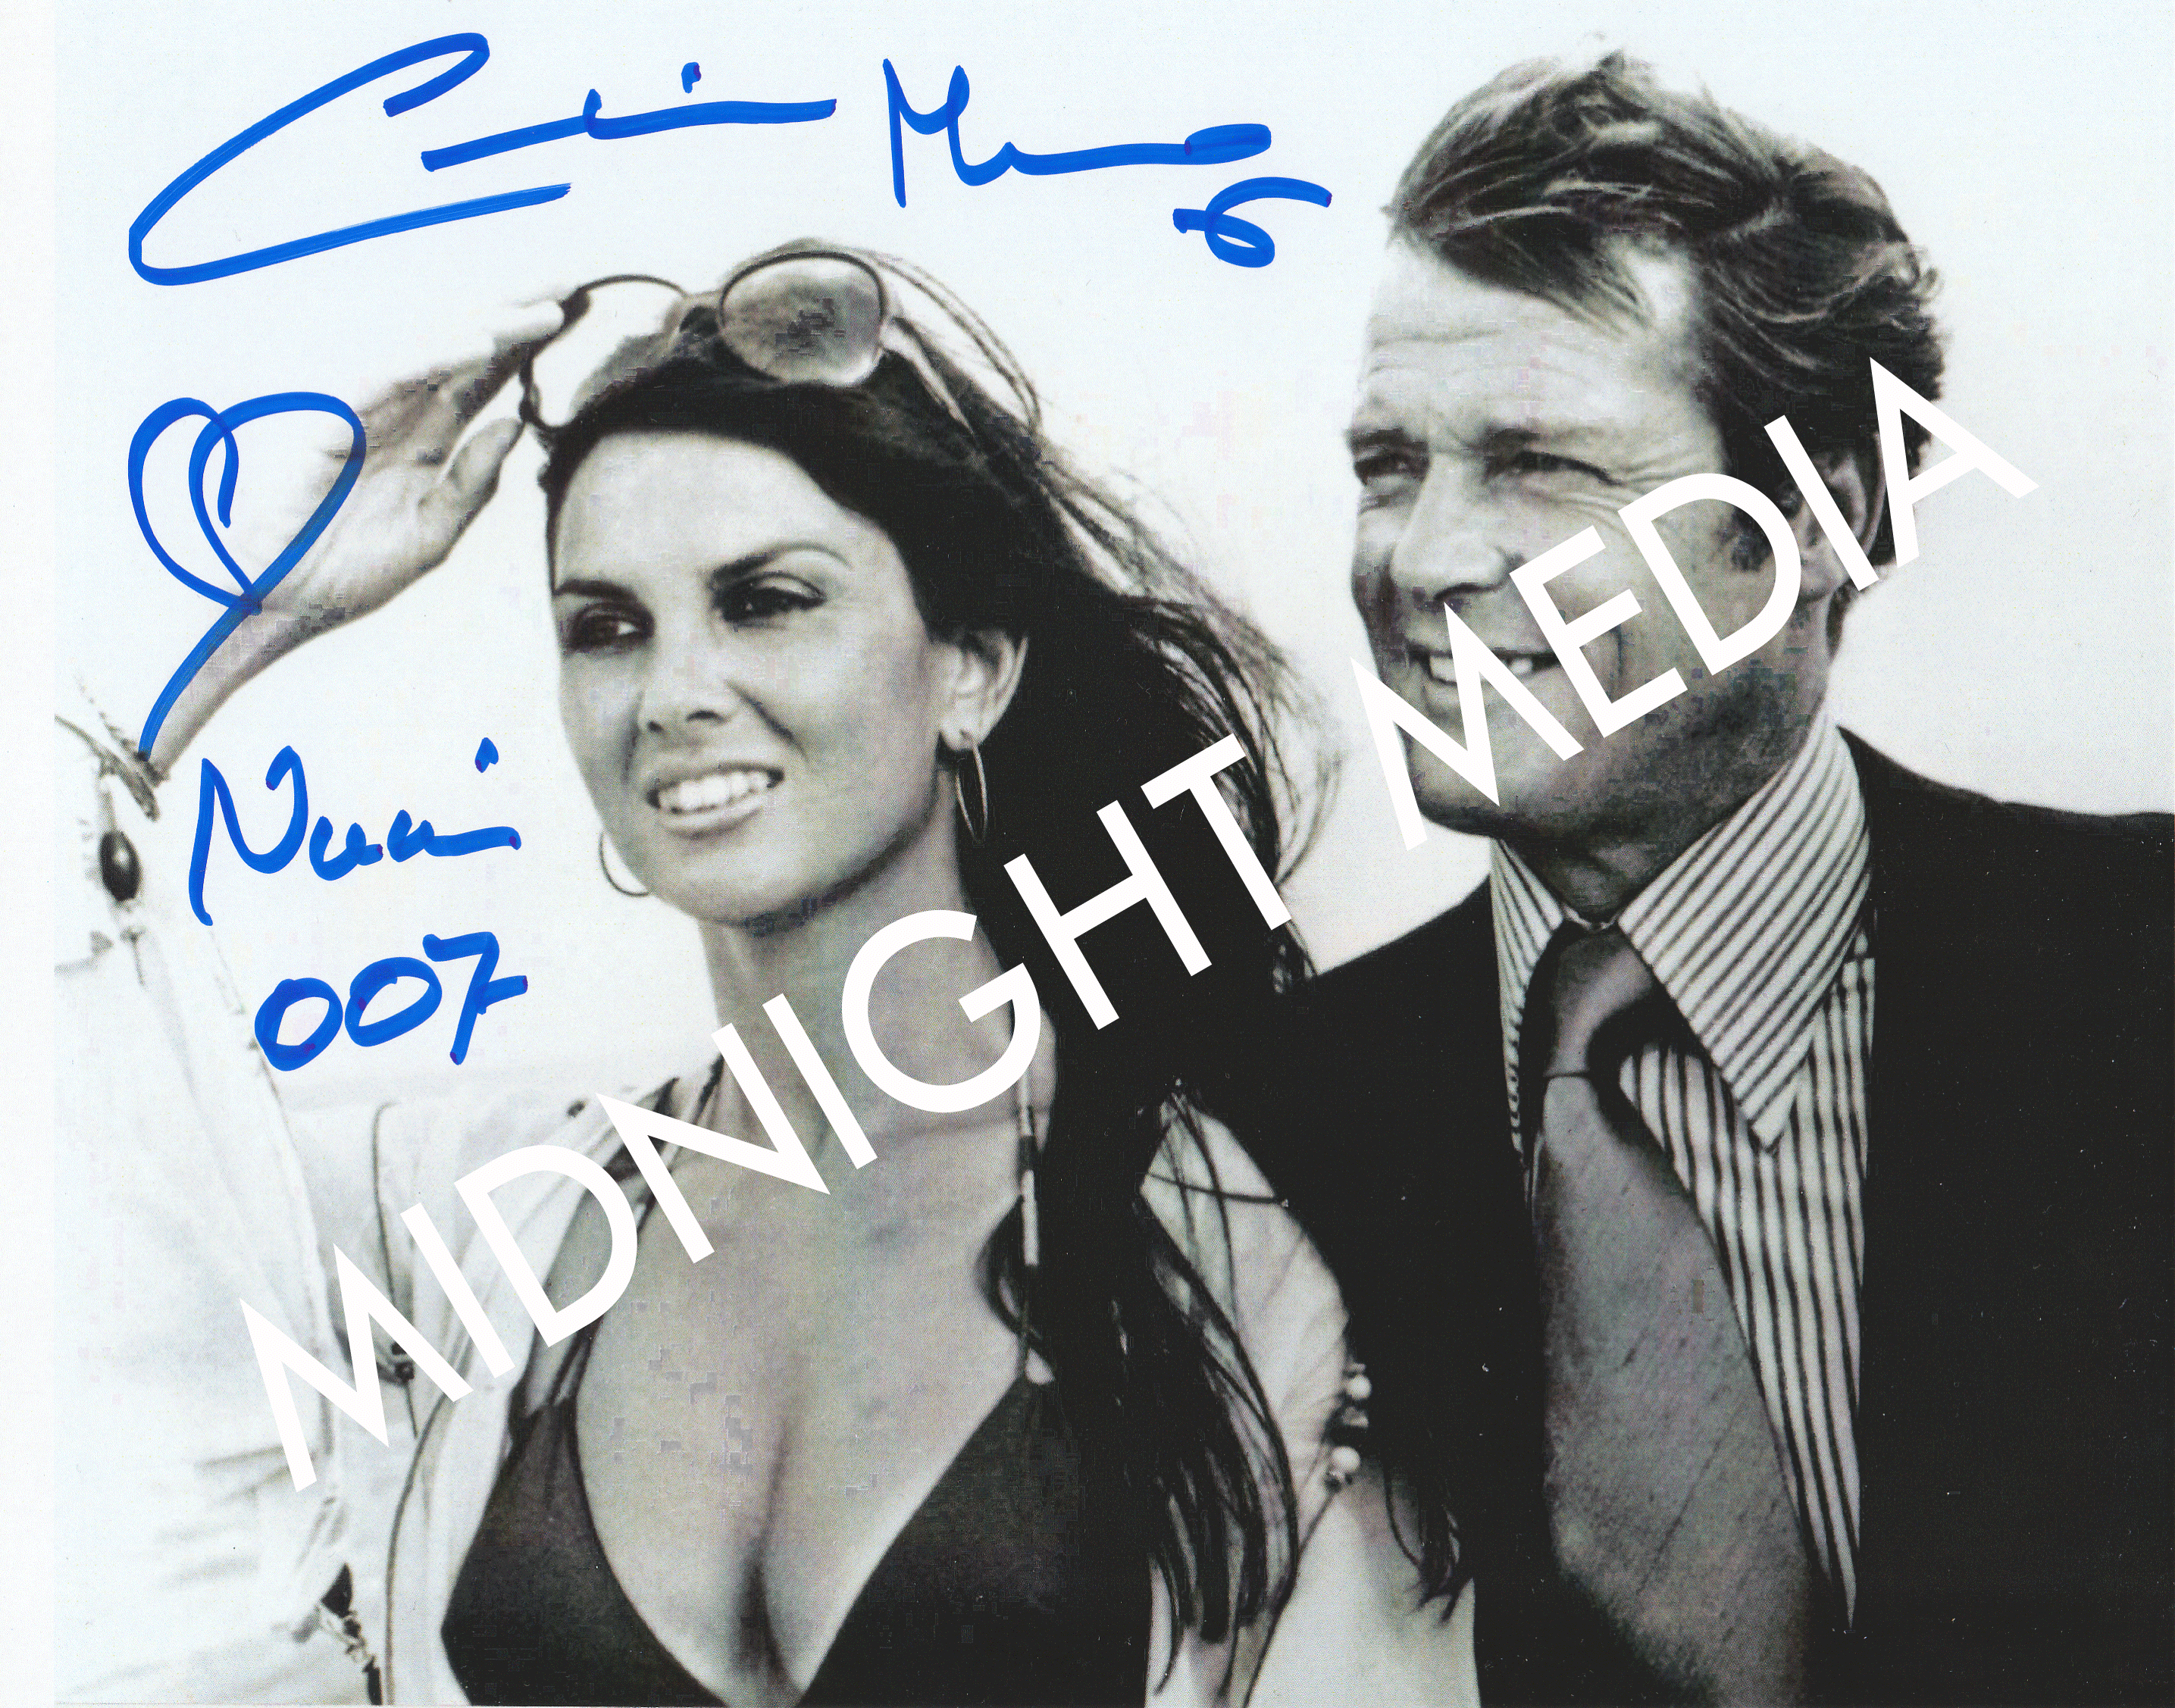 CAROLINE MUNRO SIGNED PHOTOGRAPH - THE SPY WHO LOVED ME